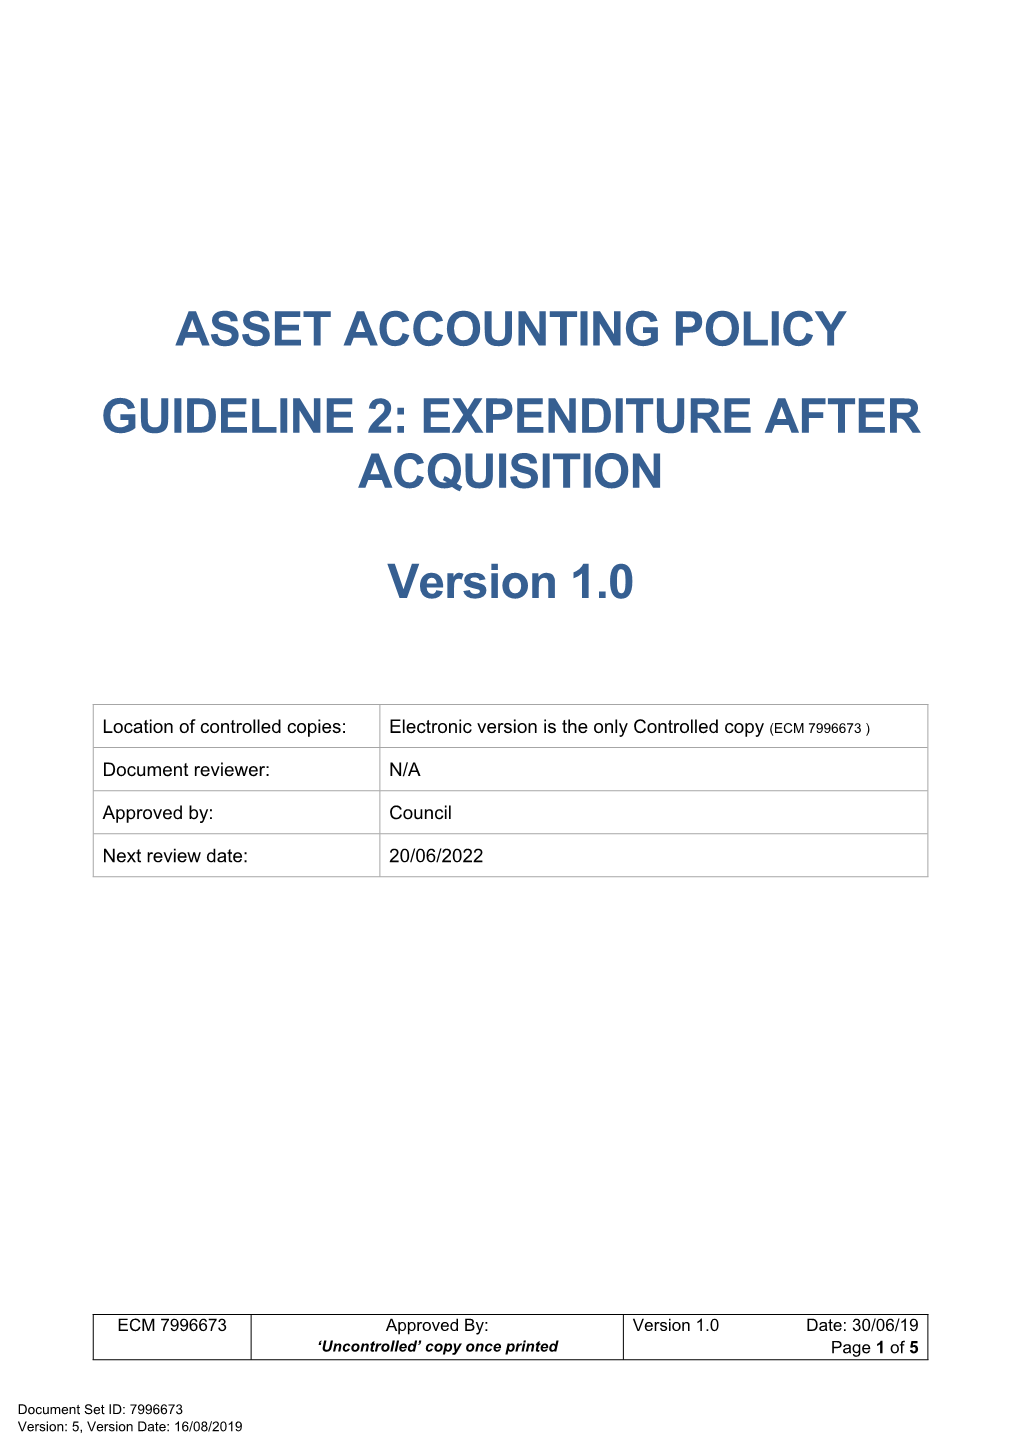 Asset Accounting Guideline 2: Expenditure After Acquisition